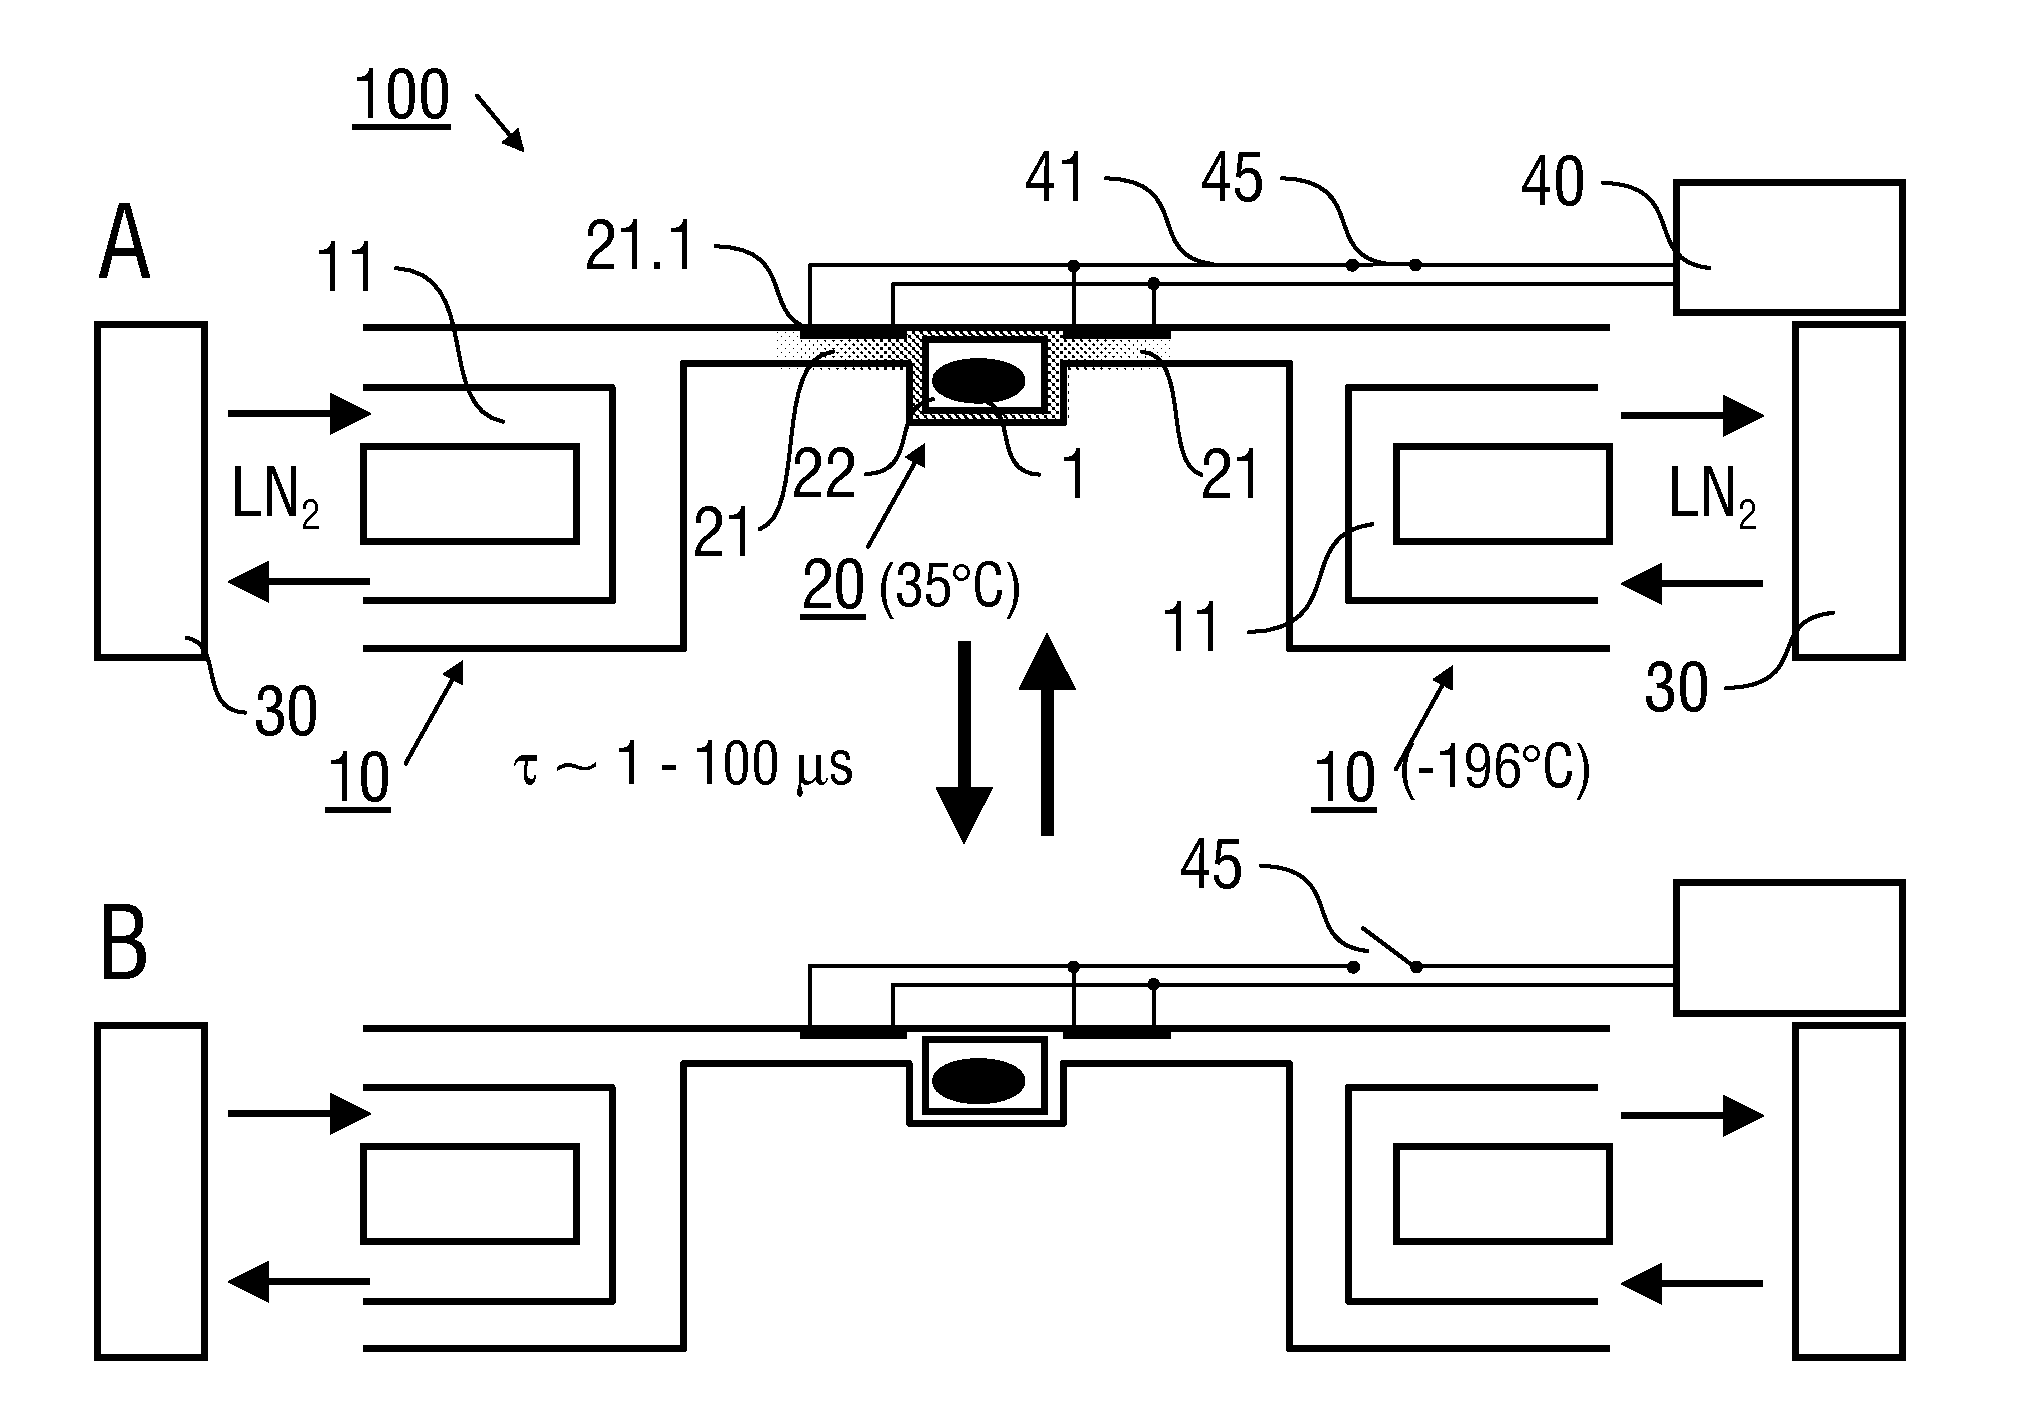 Ultra-rapid freezing device and method